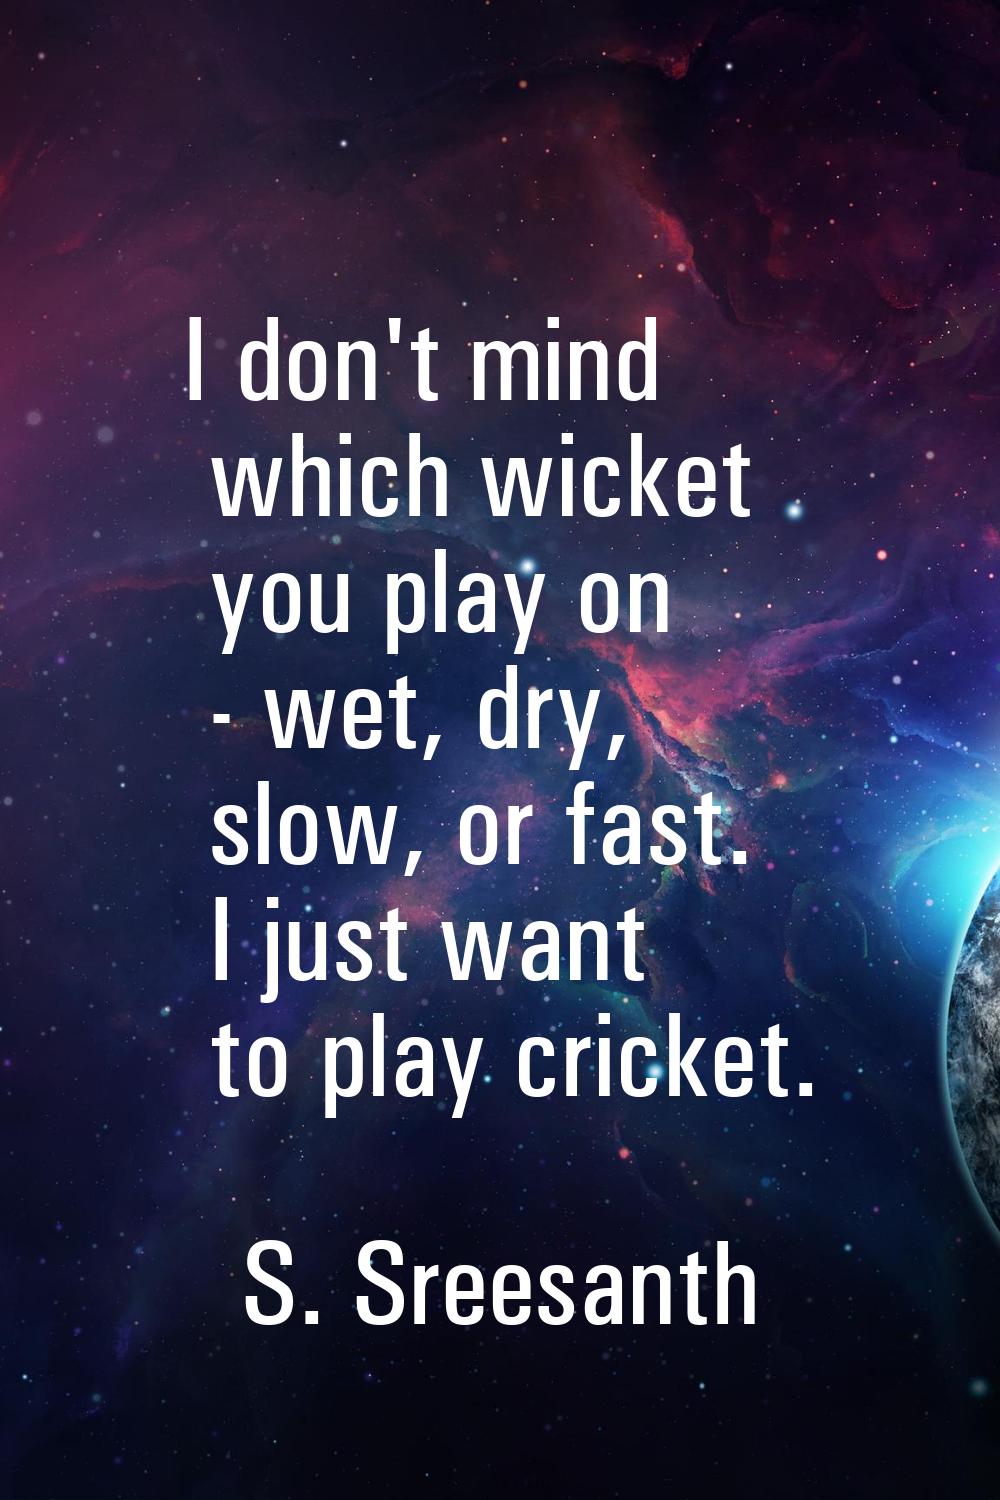 I don't mind which wicket you play on - wet, dry, slow, or fast. I just want to play cricket.